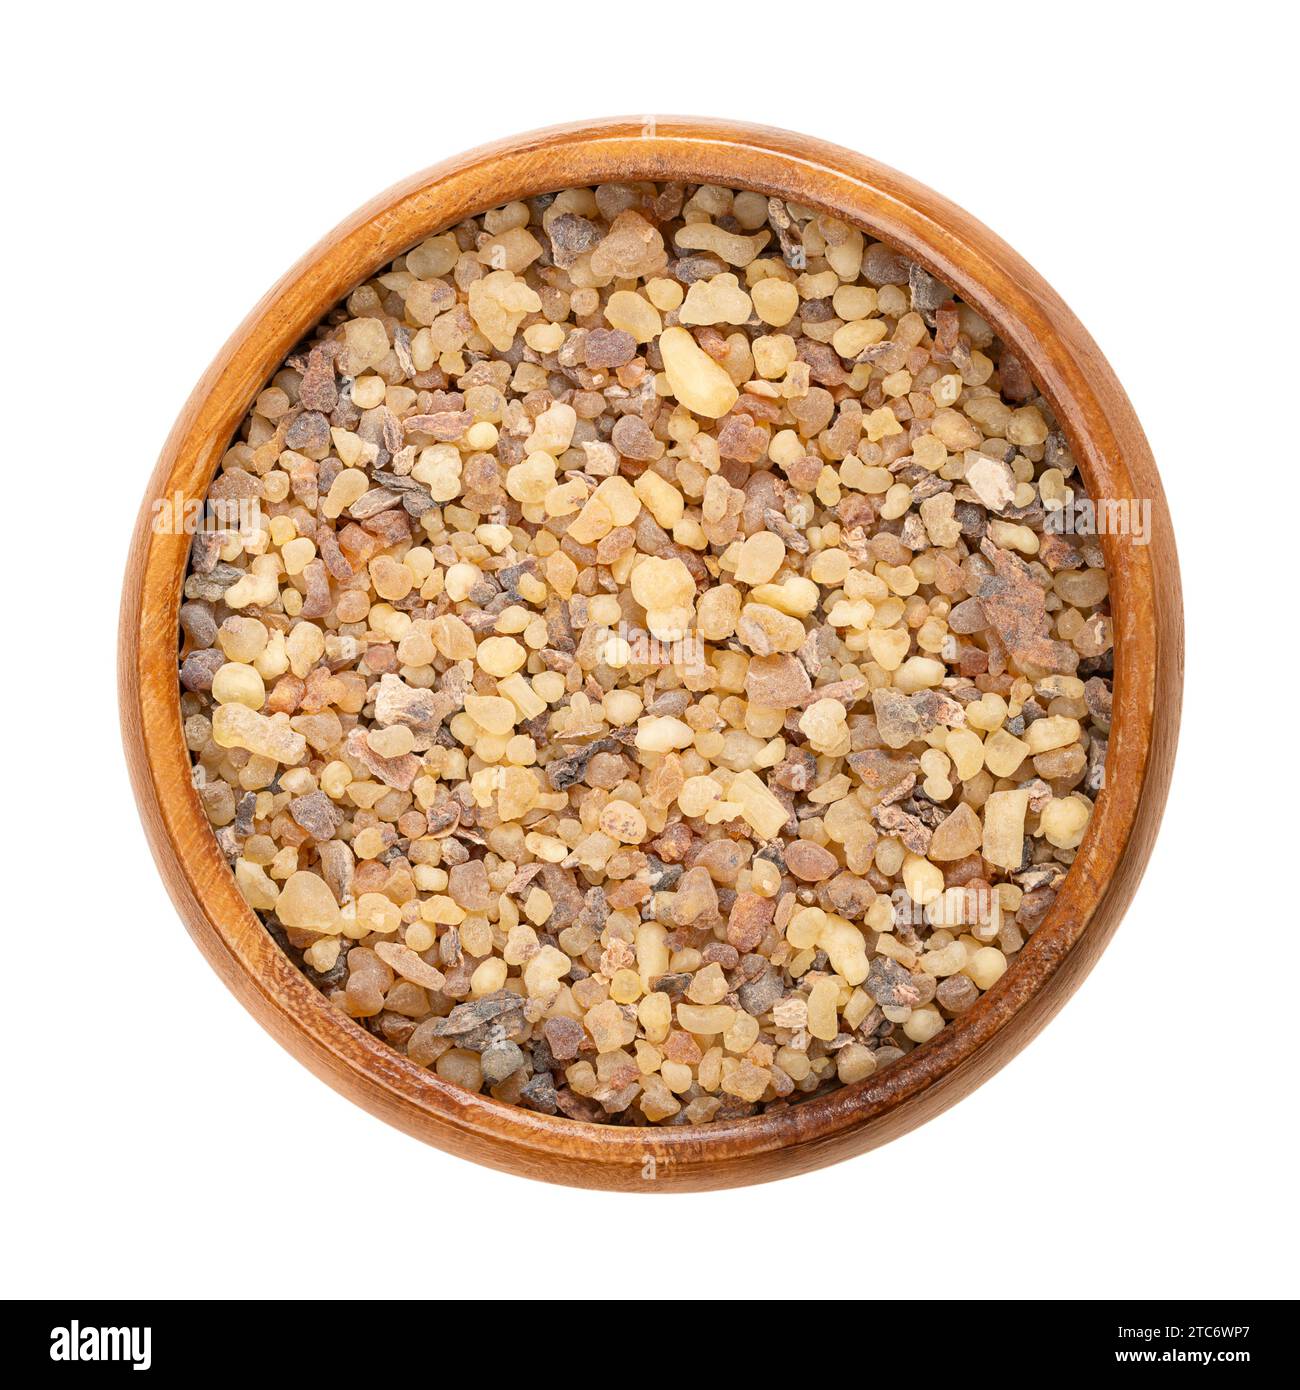 Frankincense and myrrh resin in a wooden bowl. Mixture of hardened resin of the genus Boswellia and of Commiphora myrrha. Stock Photo